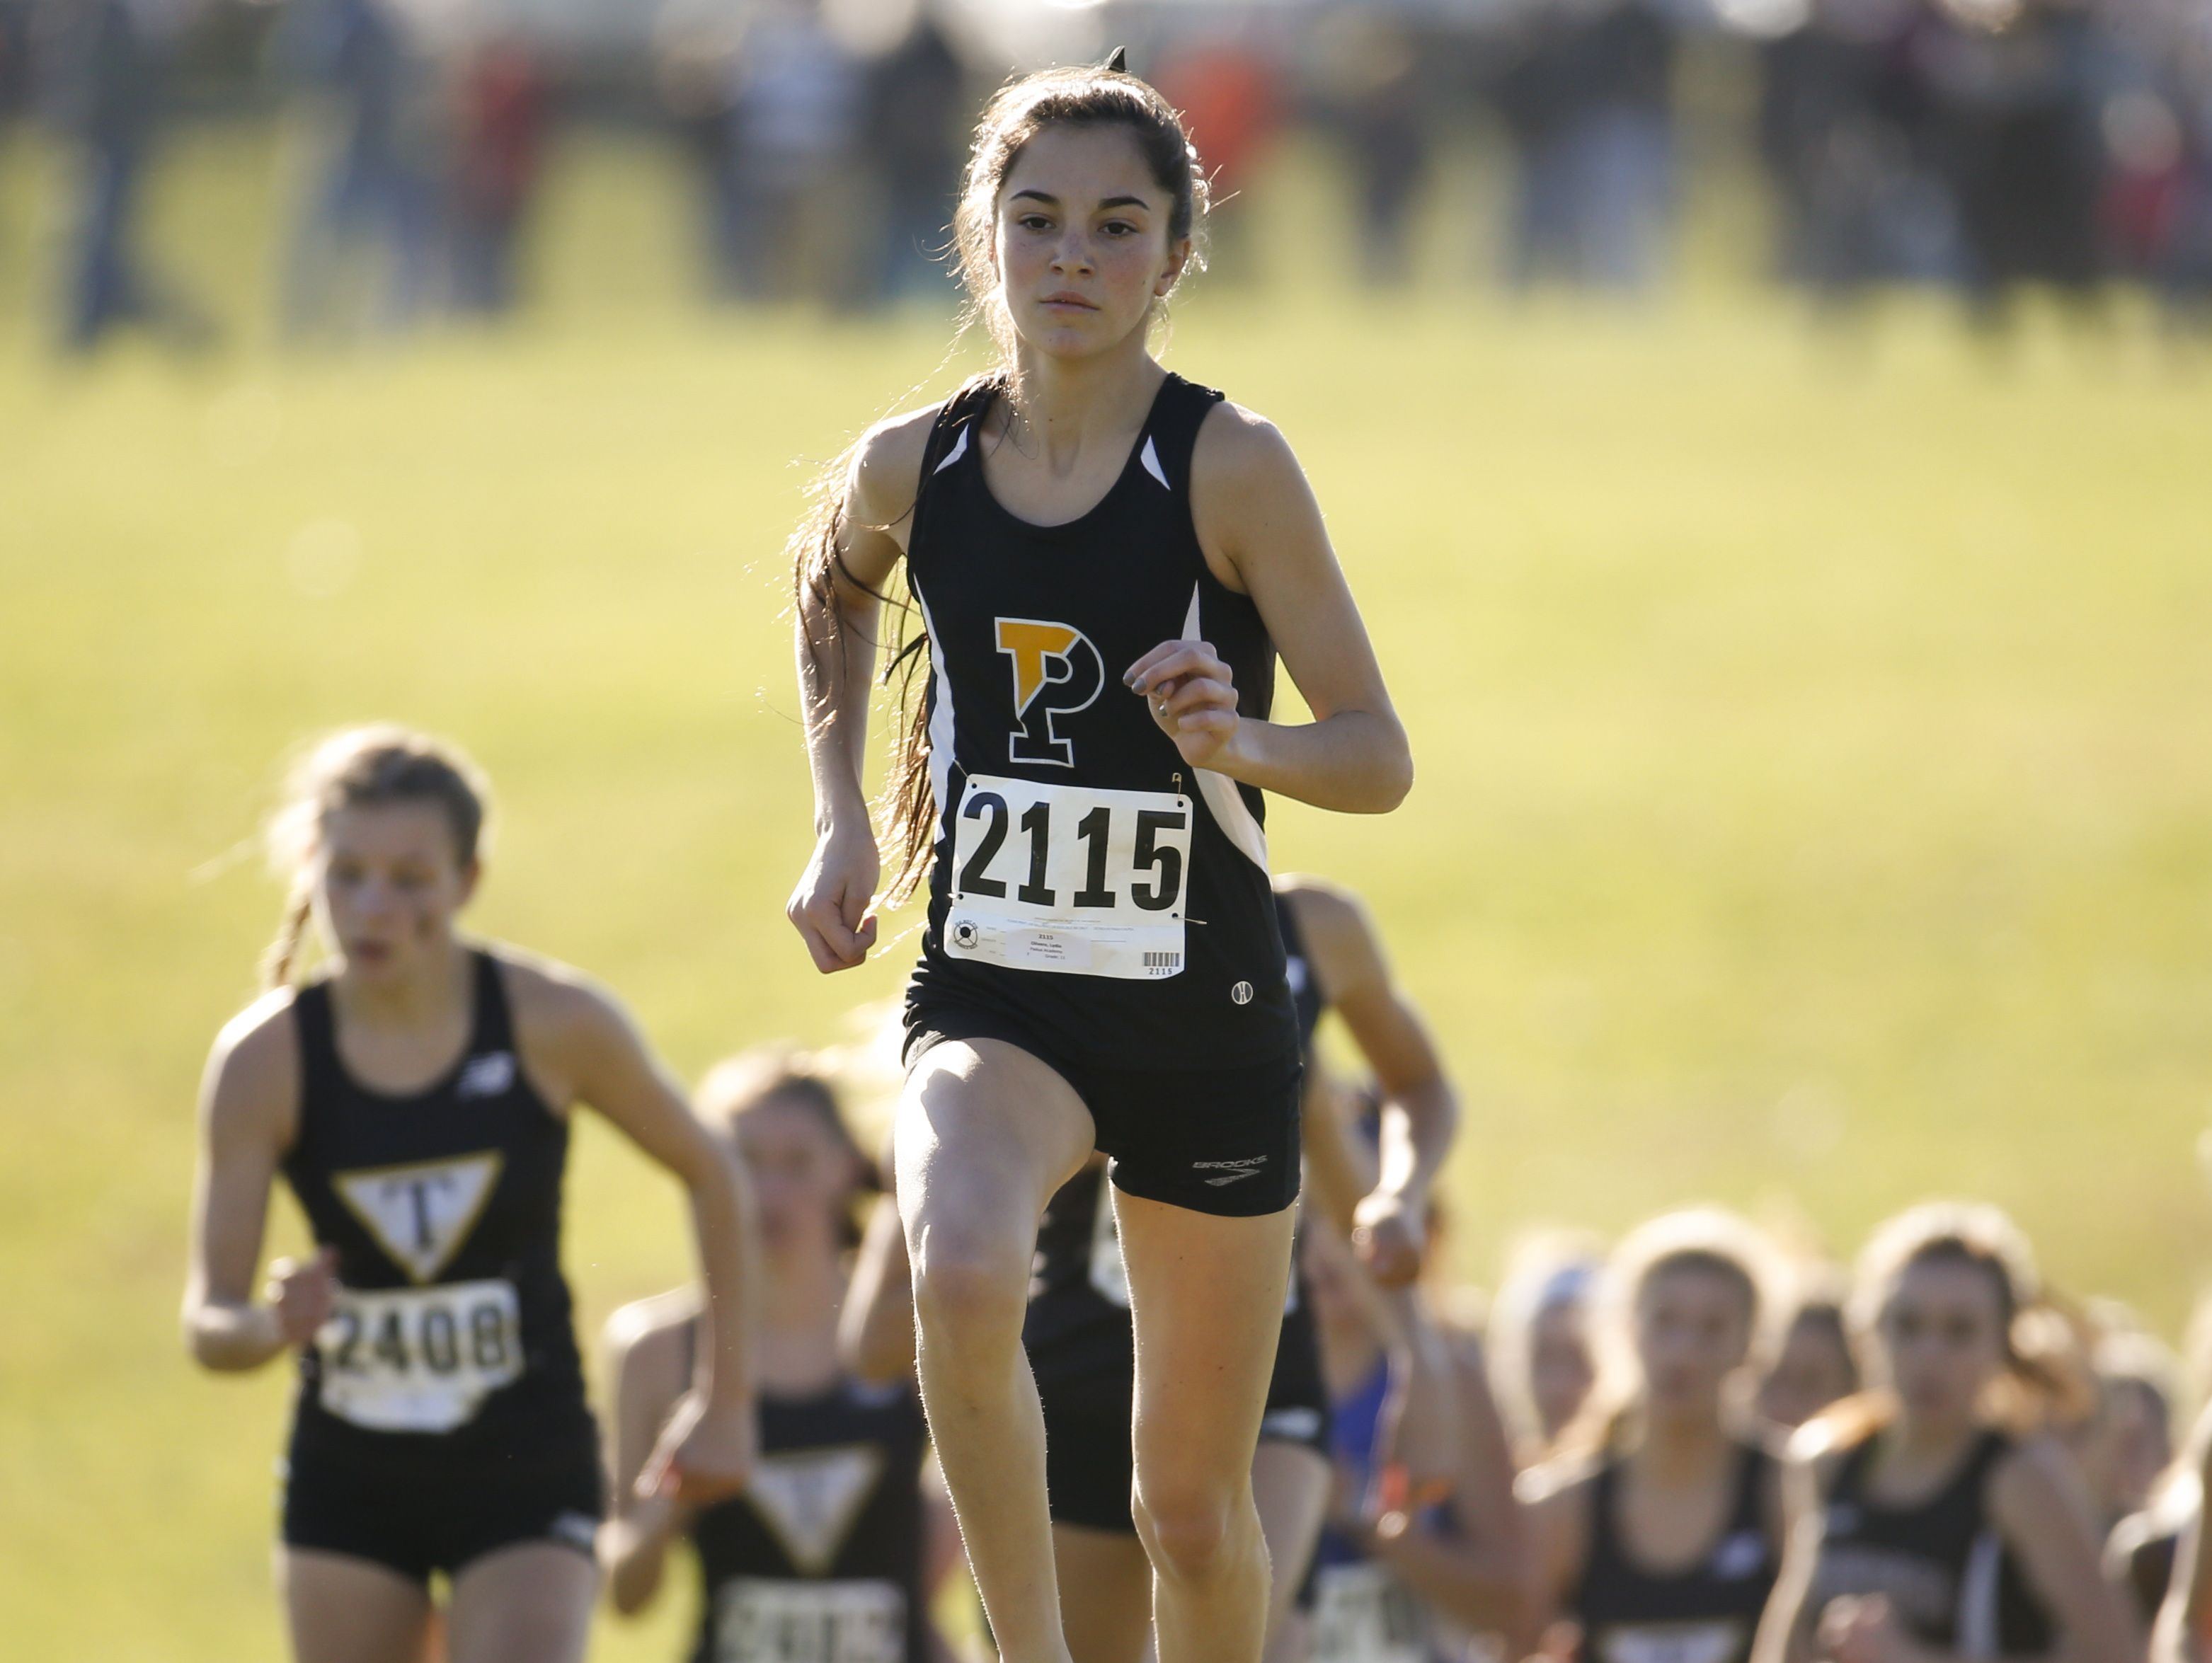 Eventual winner Lydia Olivere of Padua distances herself from the field early during the New Castle County cross country championships Saturday at Winterthur.